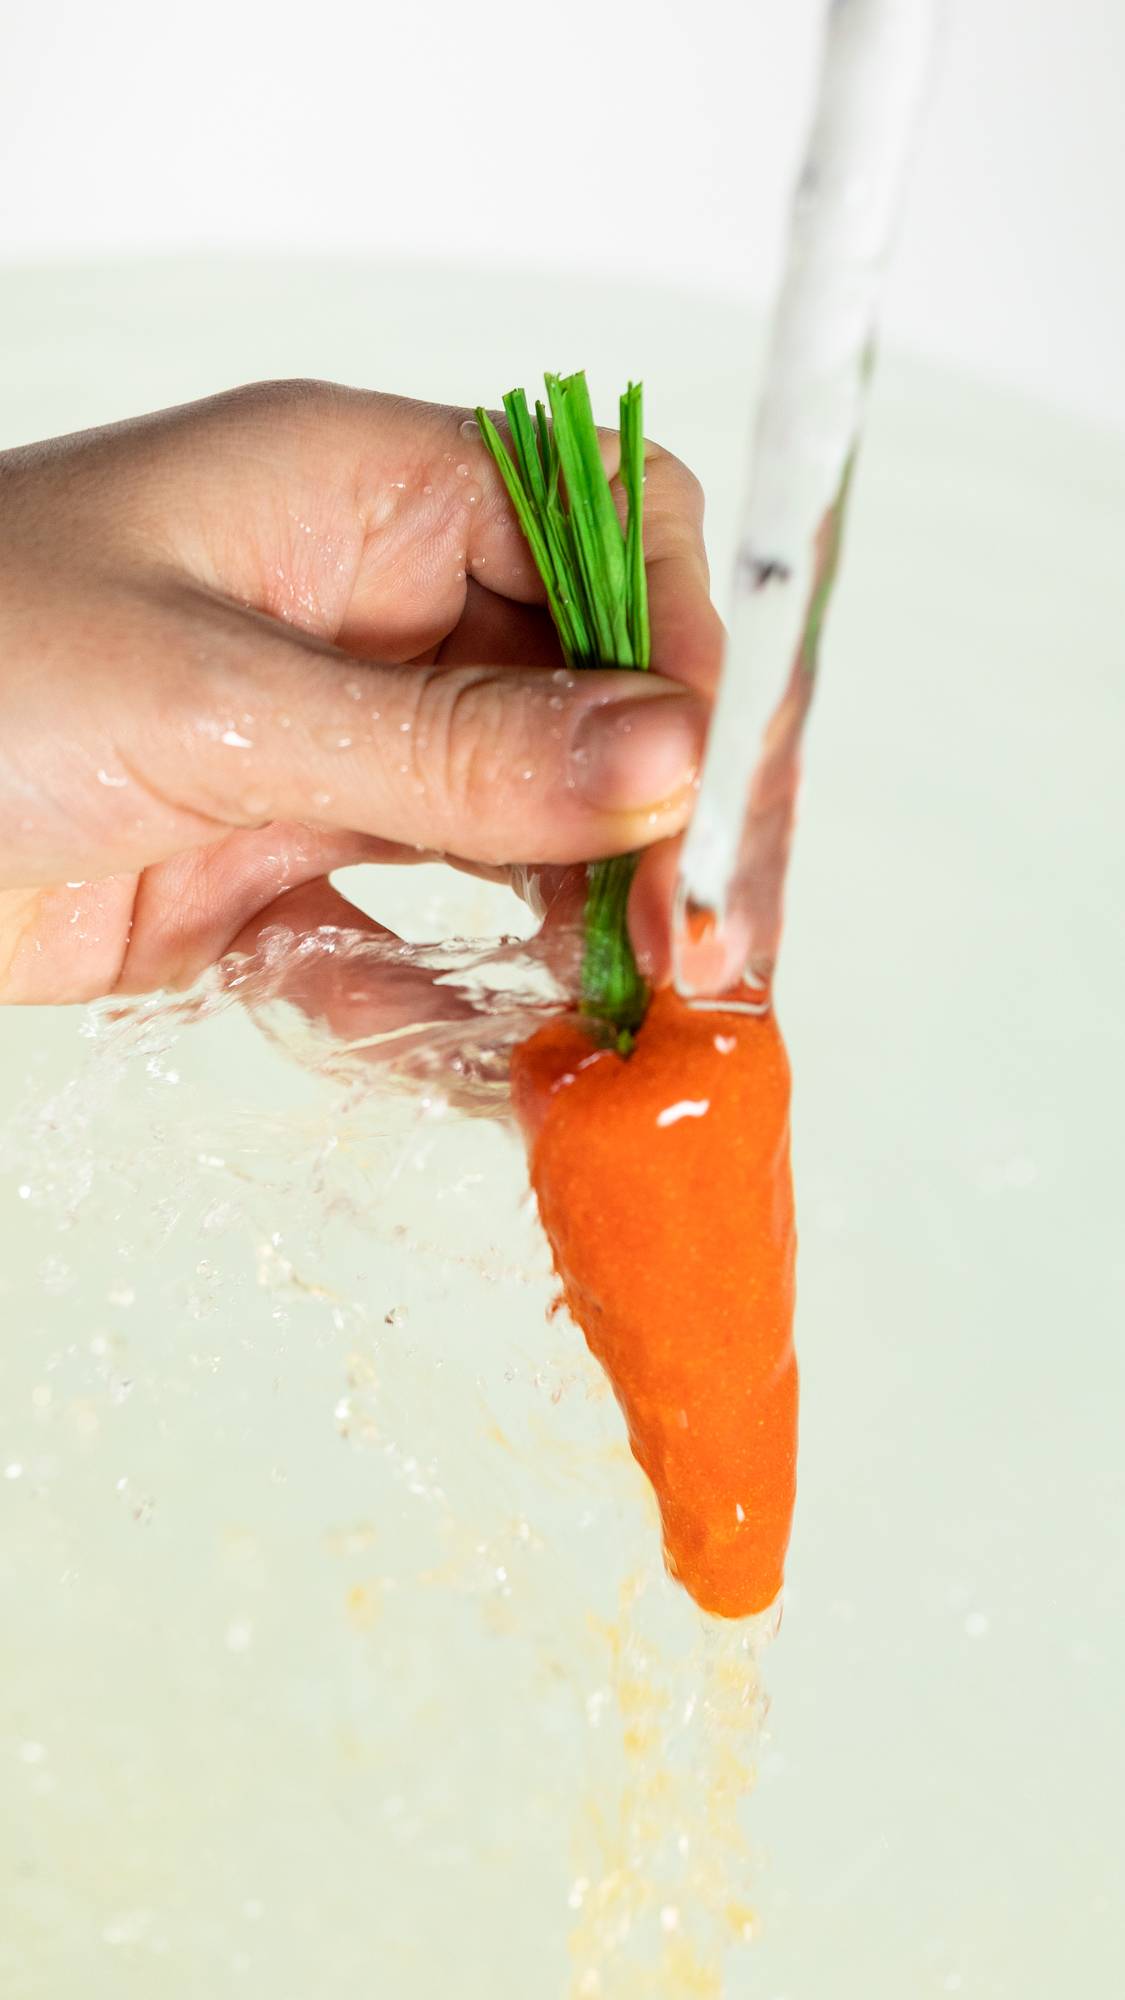 A close-up image of the model's hand holding the orange carrot bubble bar by the green leaves under running tap water into the bath below. 